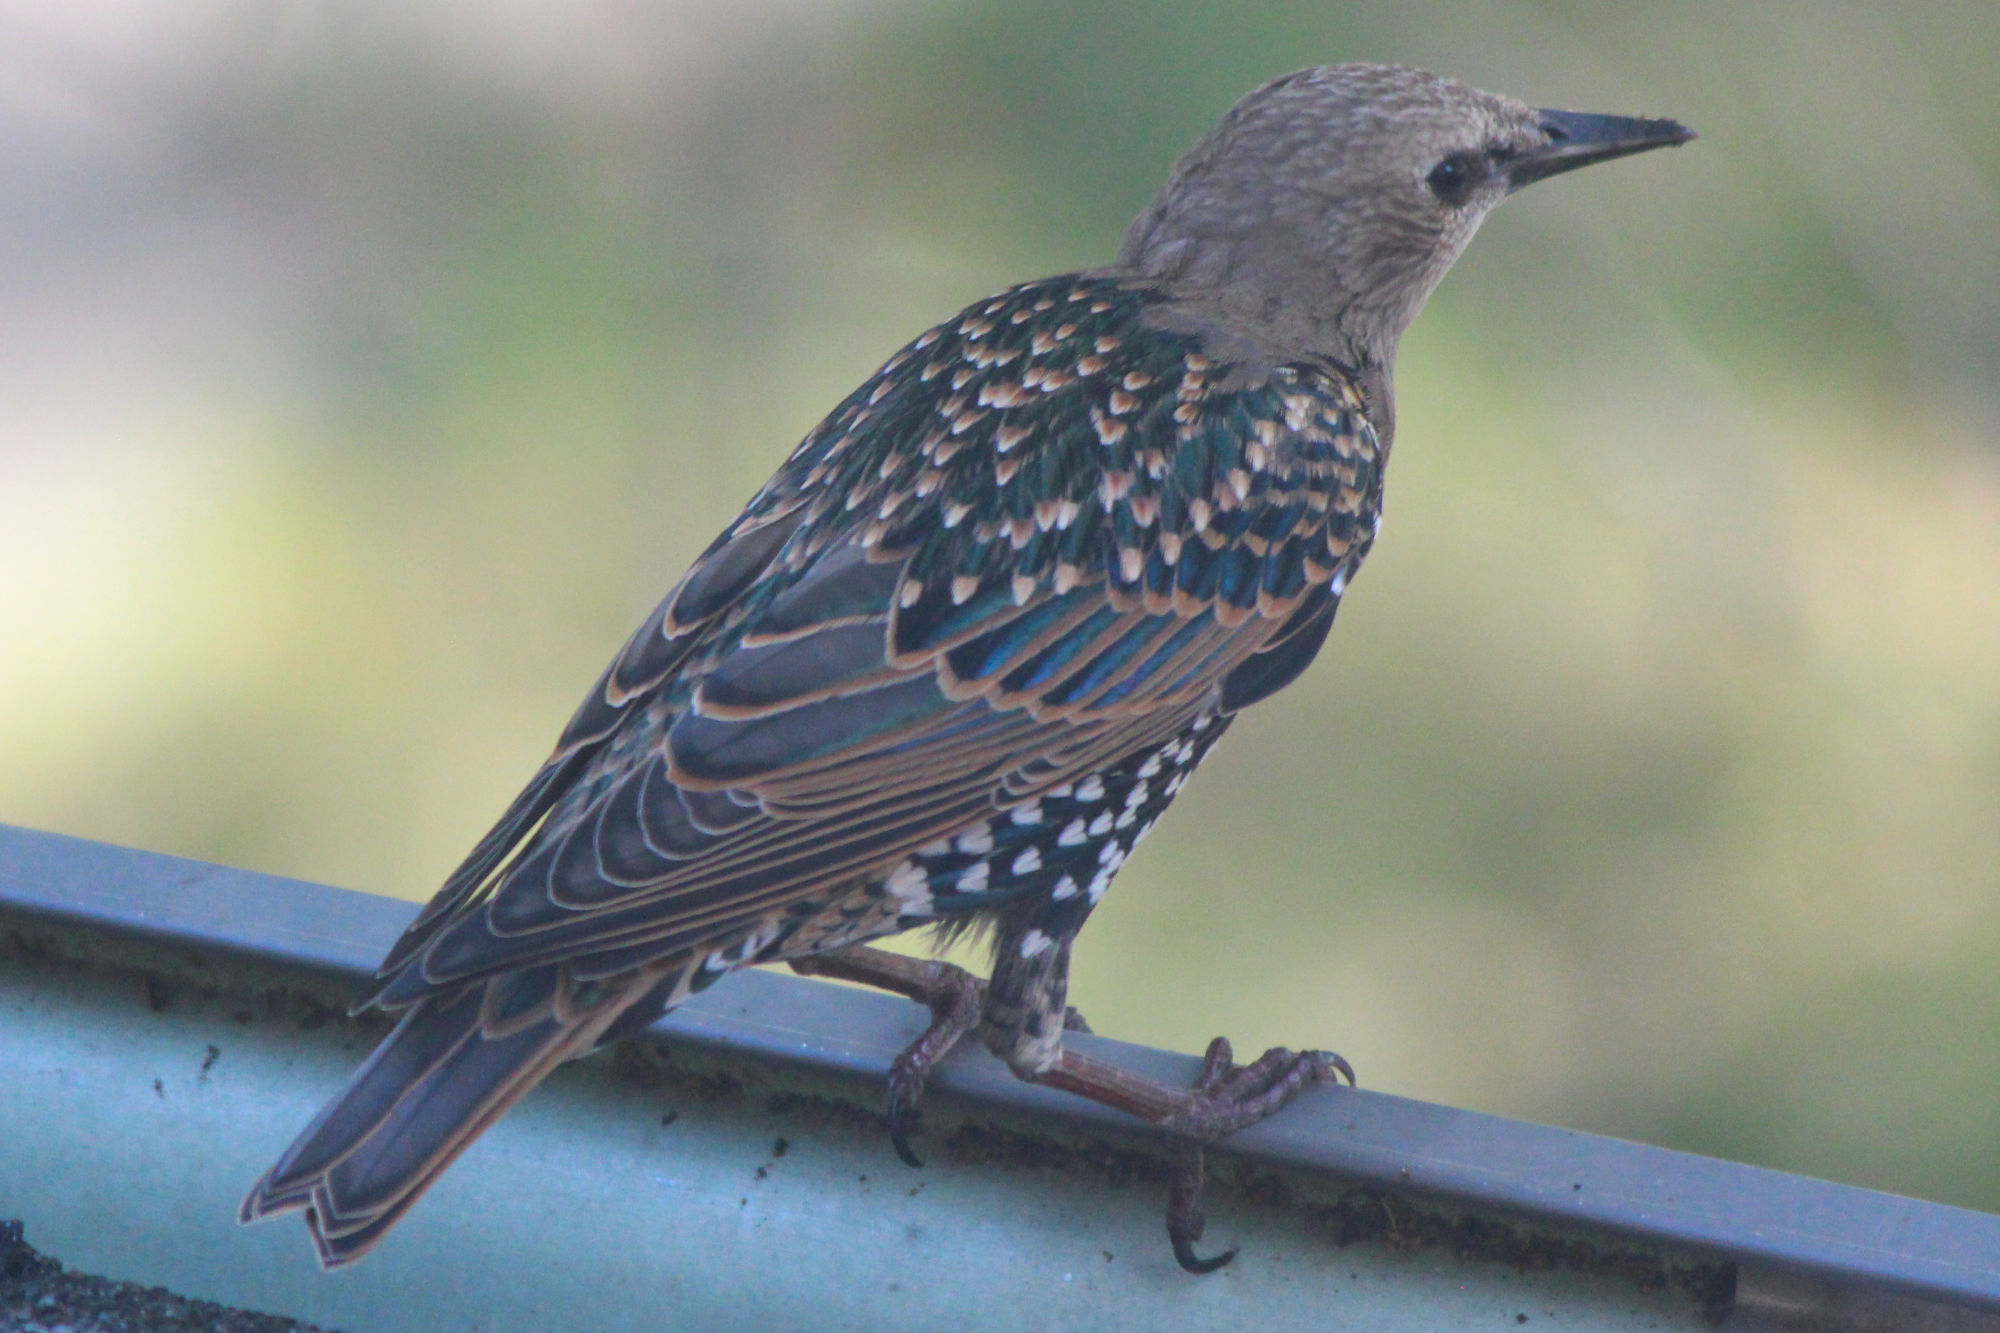 Starling, I think? standing ad looking away